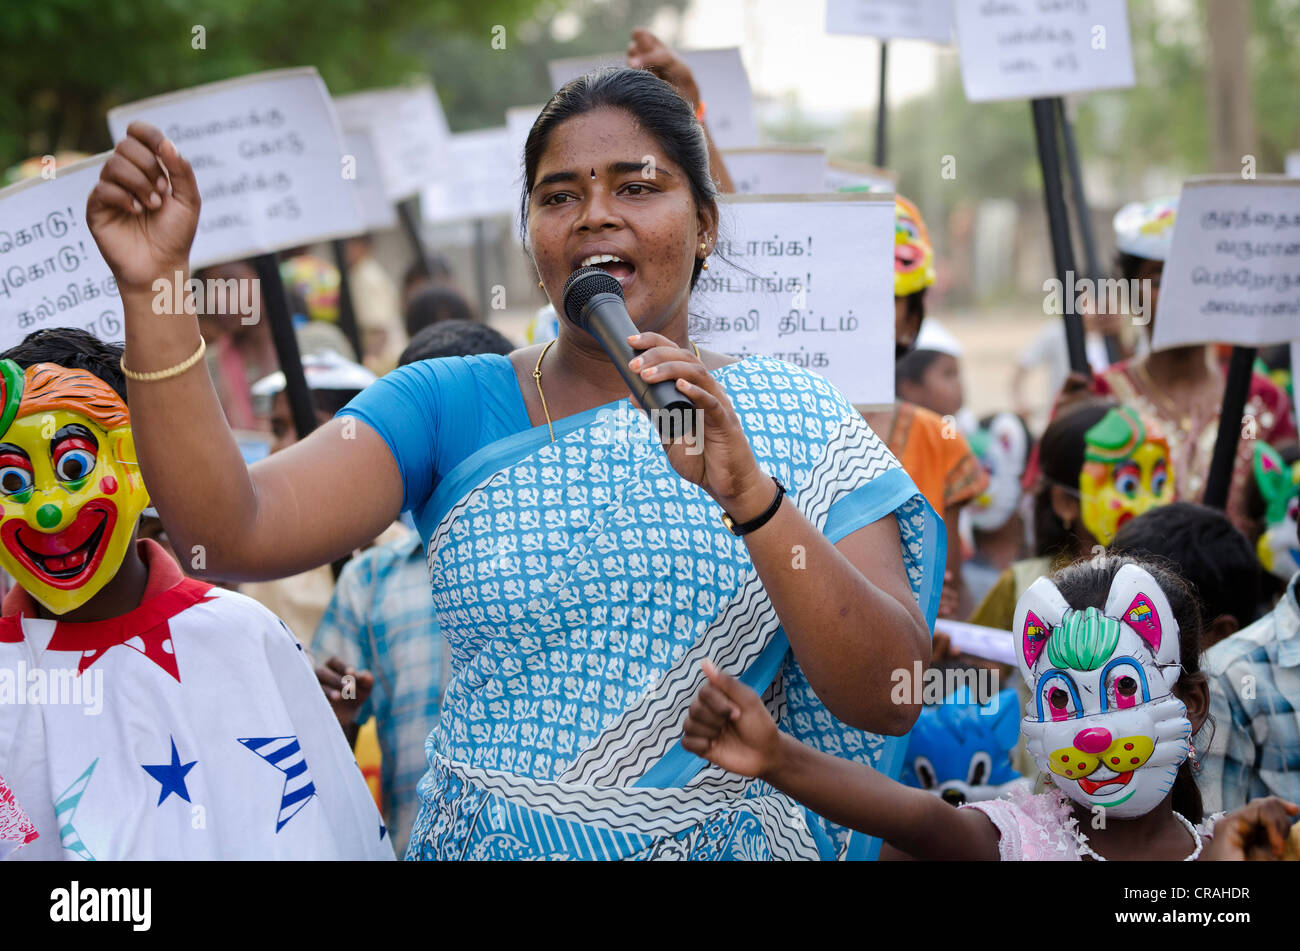 Woman speaking at rally against child labour, Karur, Tamil Nadu, Indian, Asia Stock Photo